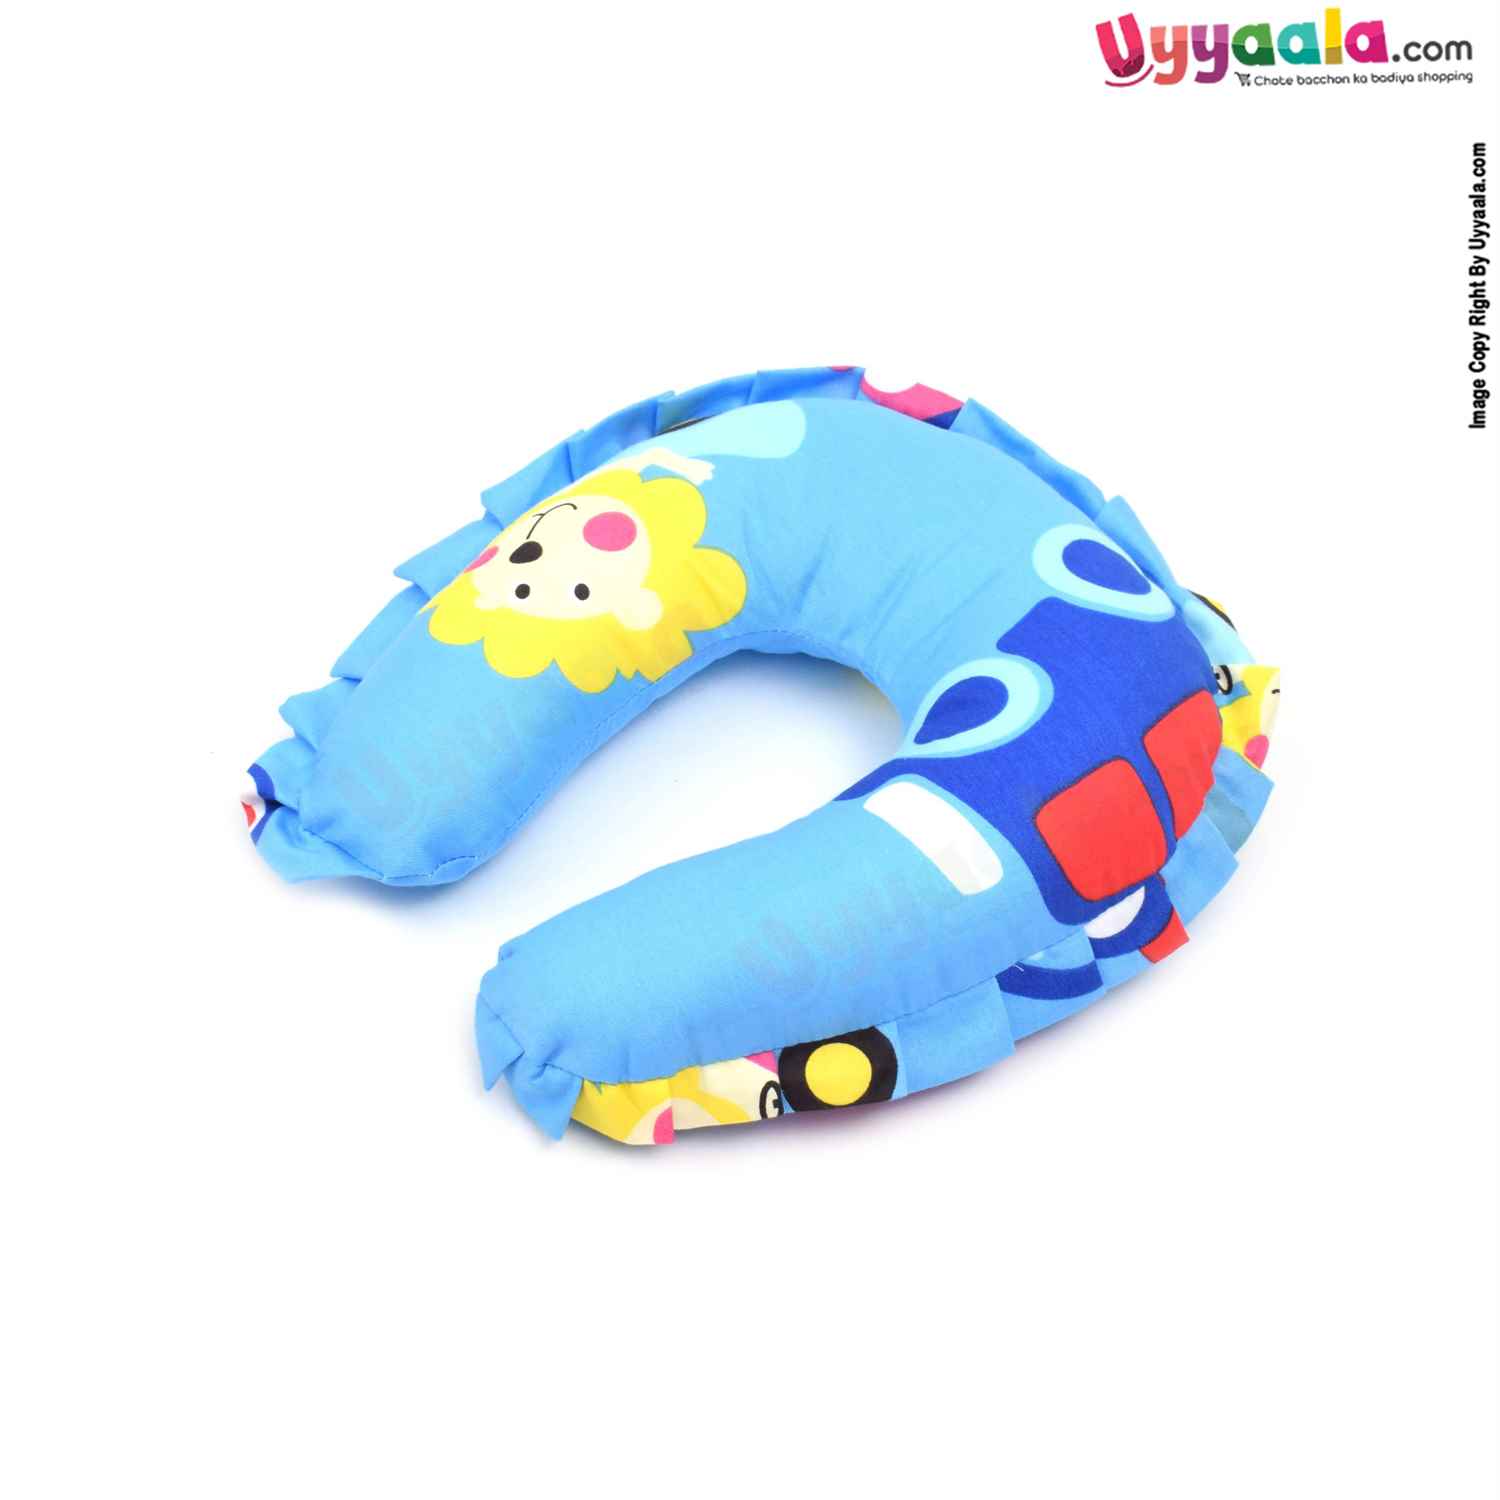 Baby Neck Pillow Cotton Horse -Shoe Shaped for Babies with Lion & Car Print 0+m Age